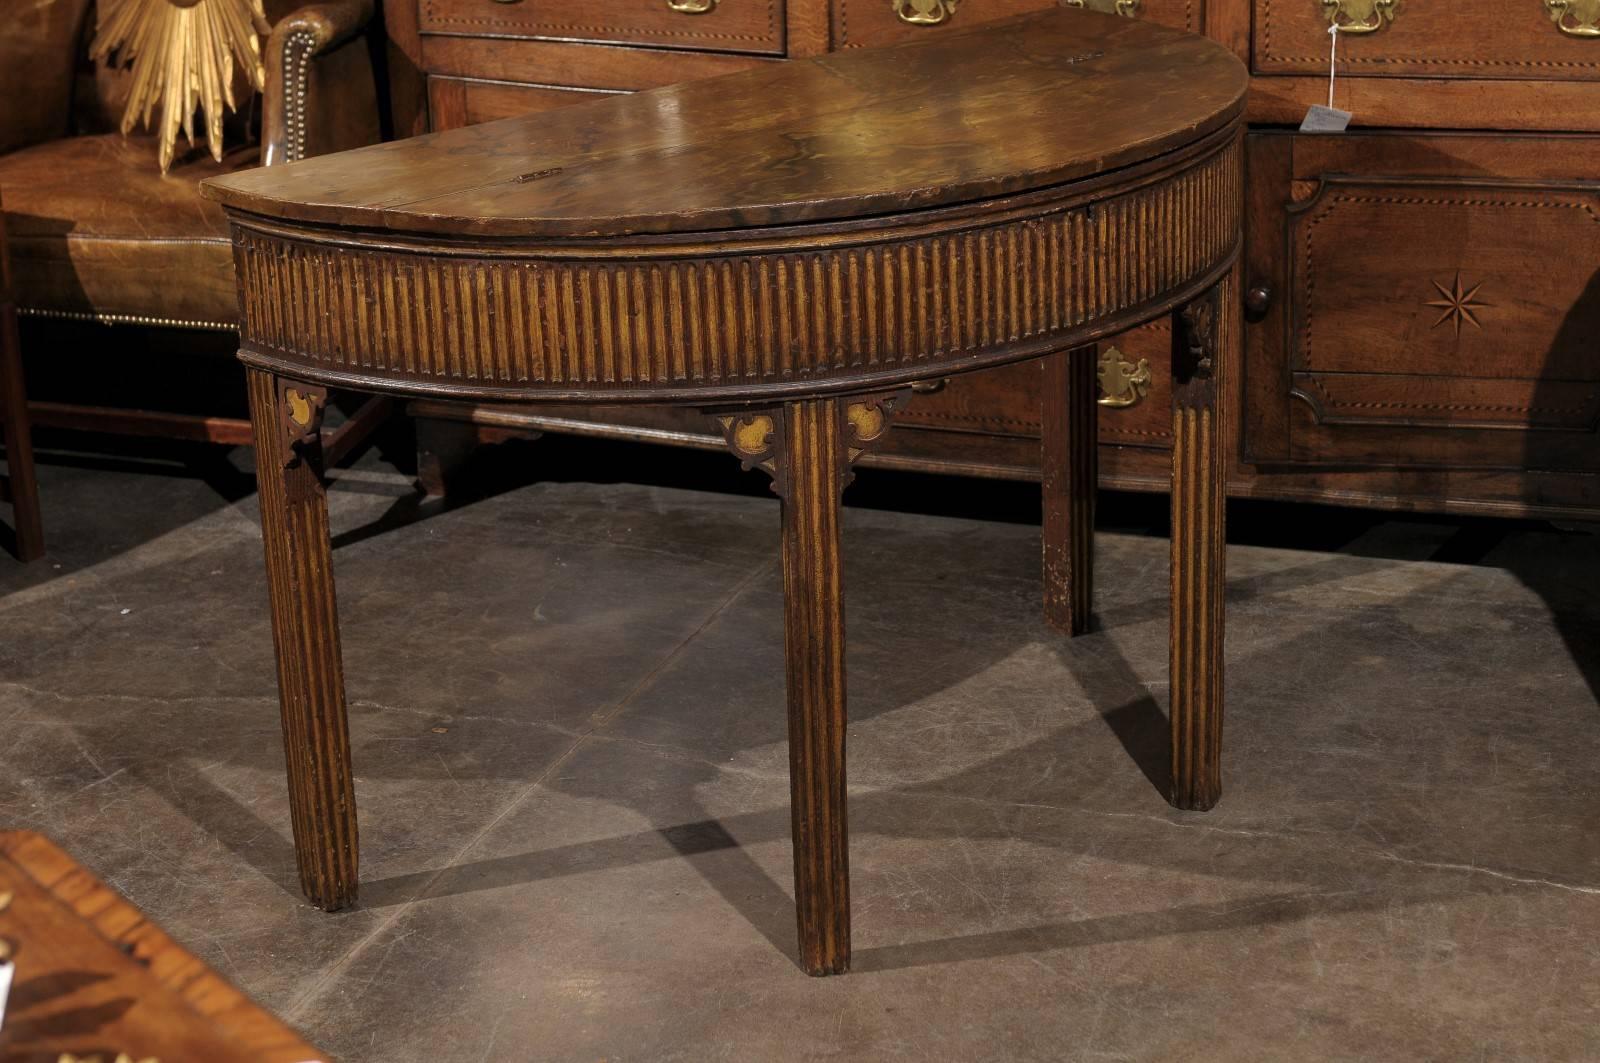 A pair of English Neoclassical style painted wood demi-lune consoles tables with marbleized lift tops, fluted aprons, and straight bracketed legs from the late 19th century. Each of this pair of English demilunes features a semi-circular top with